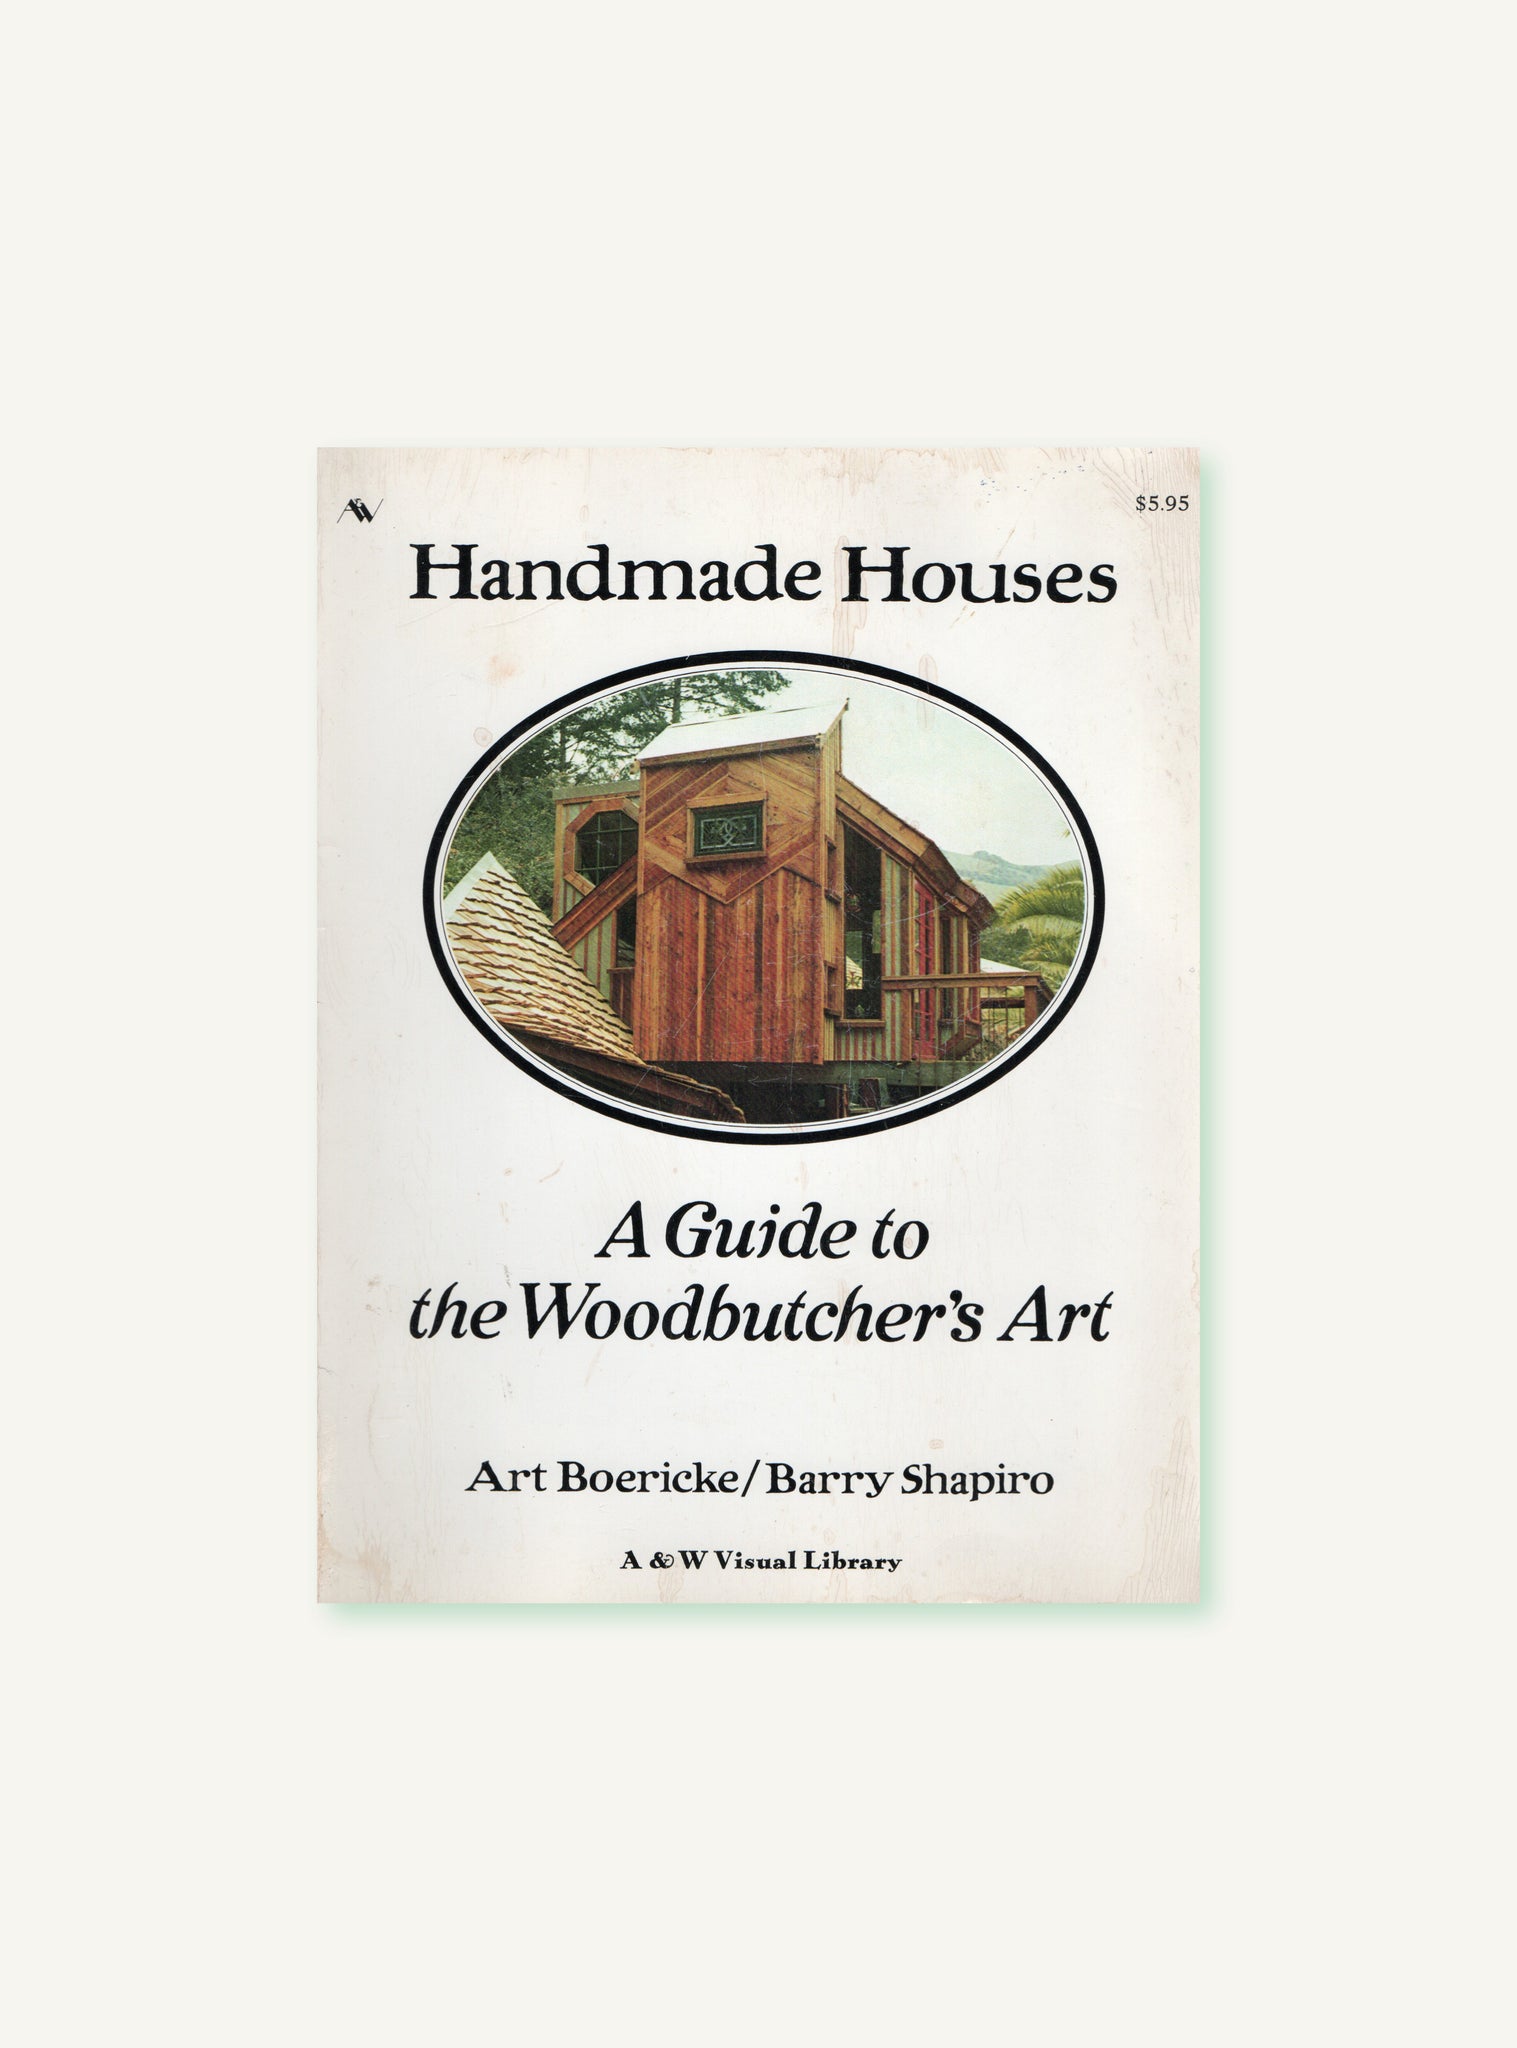 Handmade Houses: A Guide to the Woodbutcher's Art